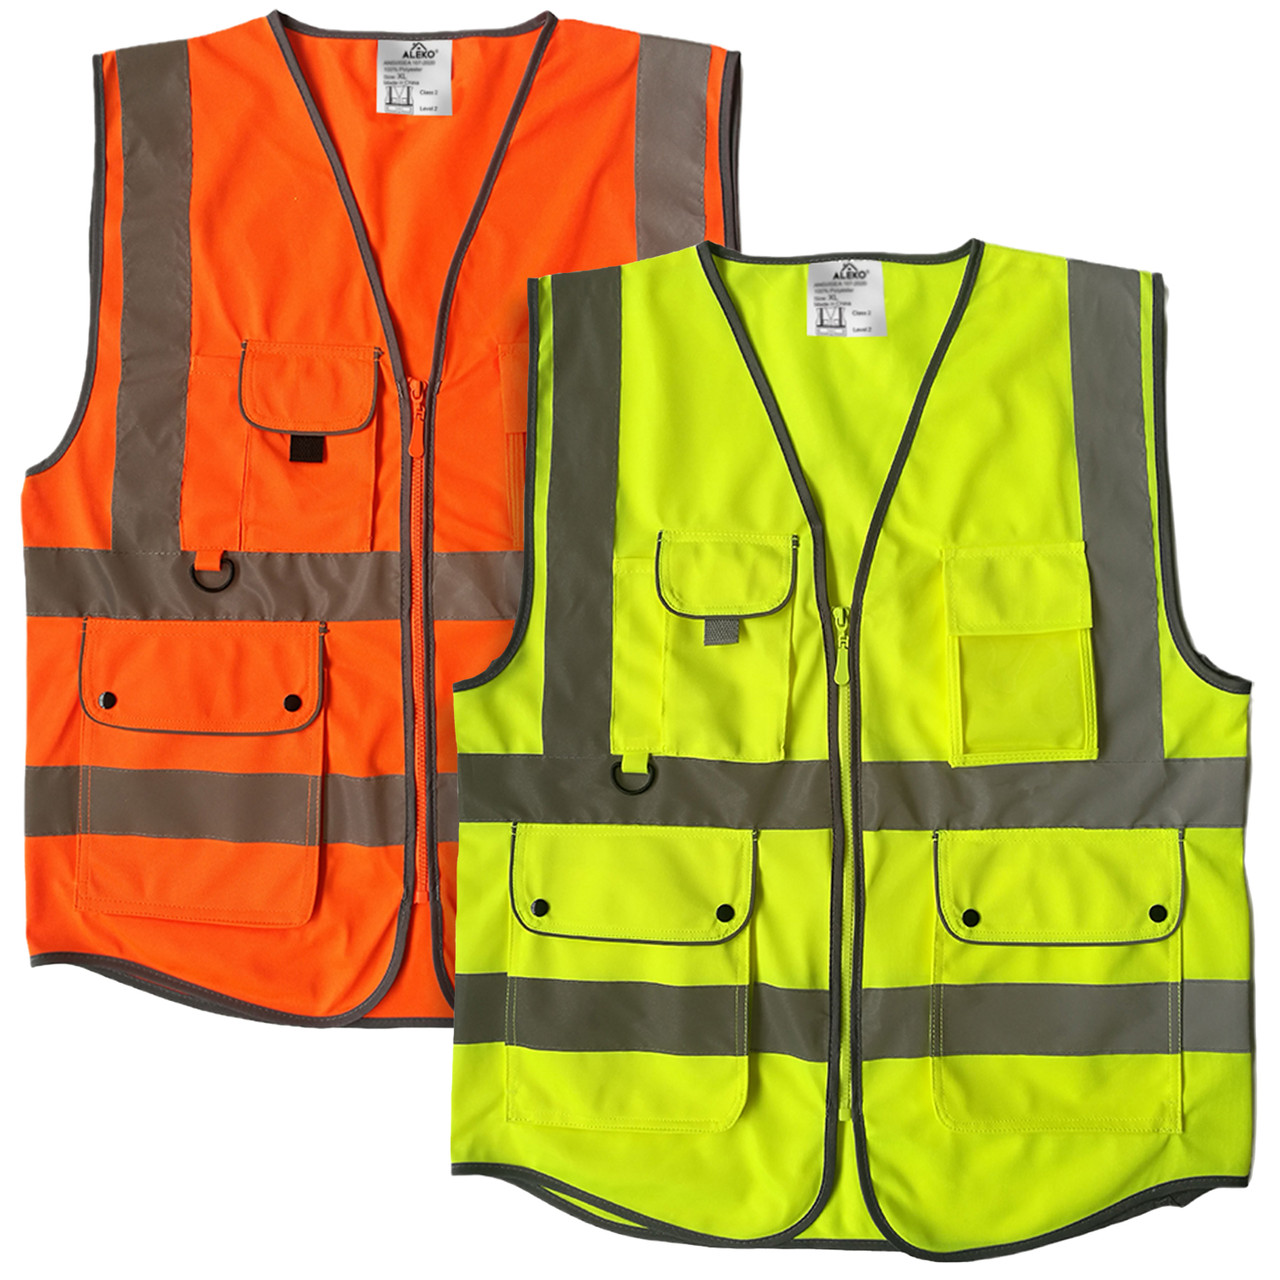 Aleko Kitsvestl-ap 2-Pack Safety Vests with Pockets and Reflective Tape - Class 2, ANSI/ISEA Compliant - Orange Yellow - L